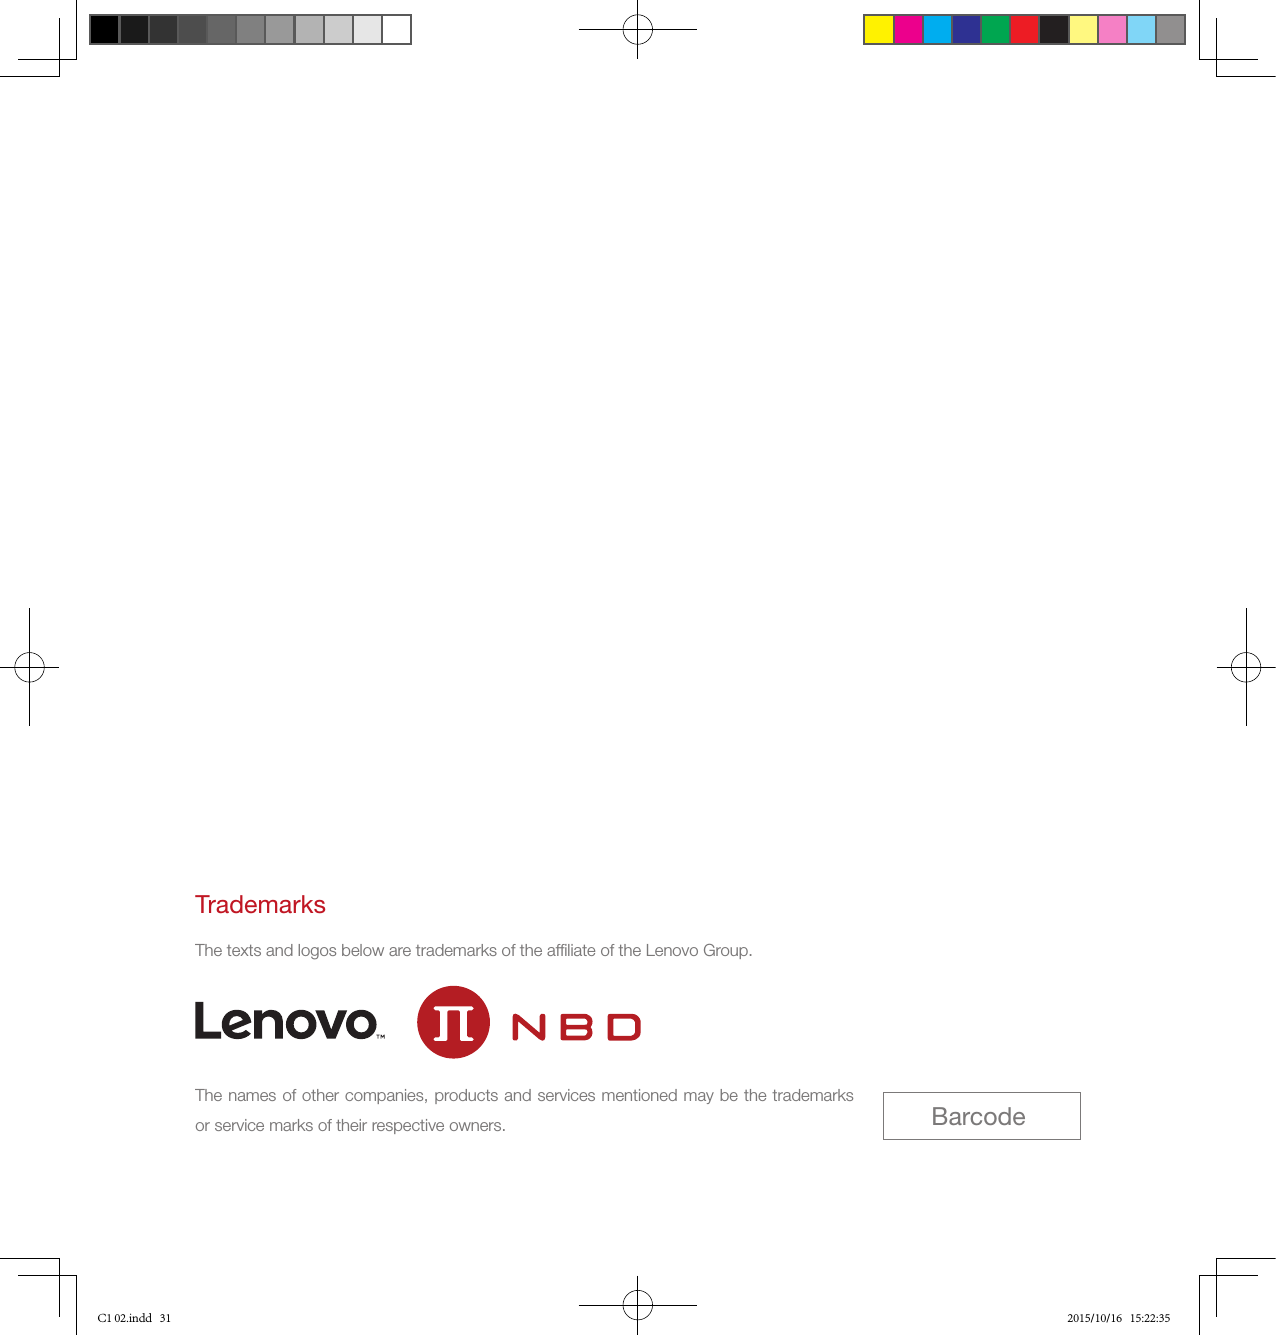 TrademarksThe texts and logos below are trademarks of the afﬁliate of the Lenovo Group.The names of other companies, products and services mentioned may be the trademarks or service marks of their respective owners. BarcodeC1 02.indd   31 2015/10/16   15:22:35